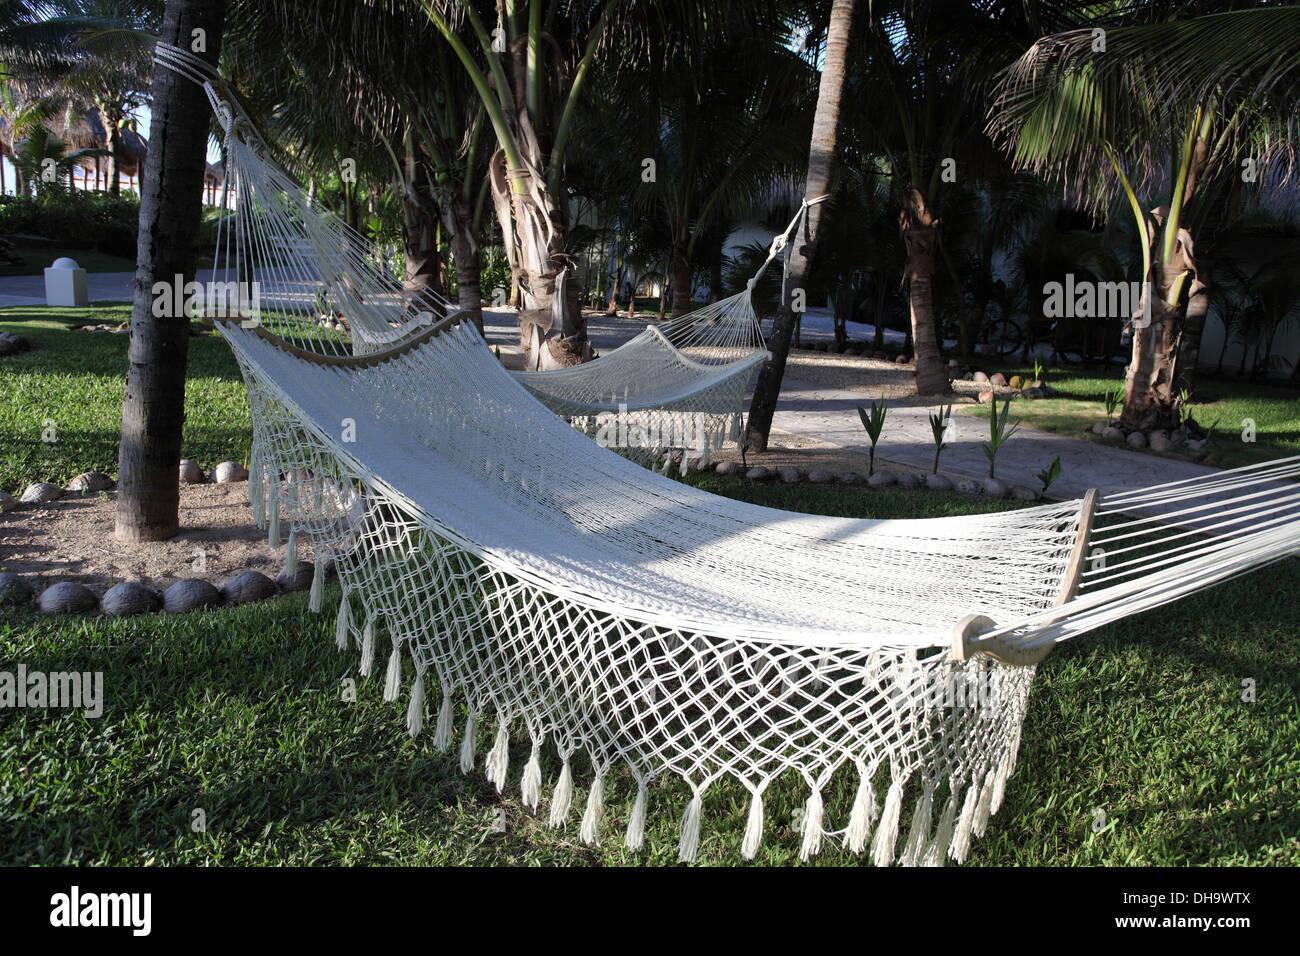 Hammock on the grounds of a Mexican holiday resort, Riviera Maya Stock Photo